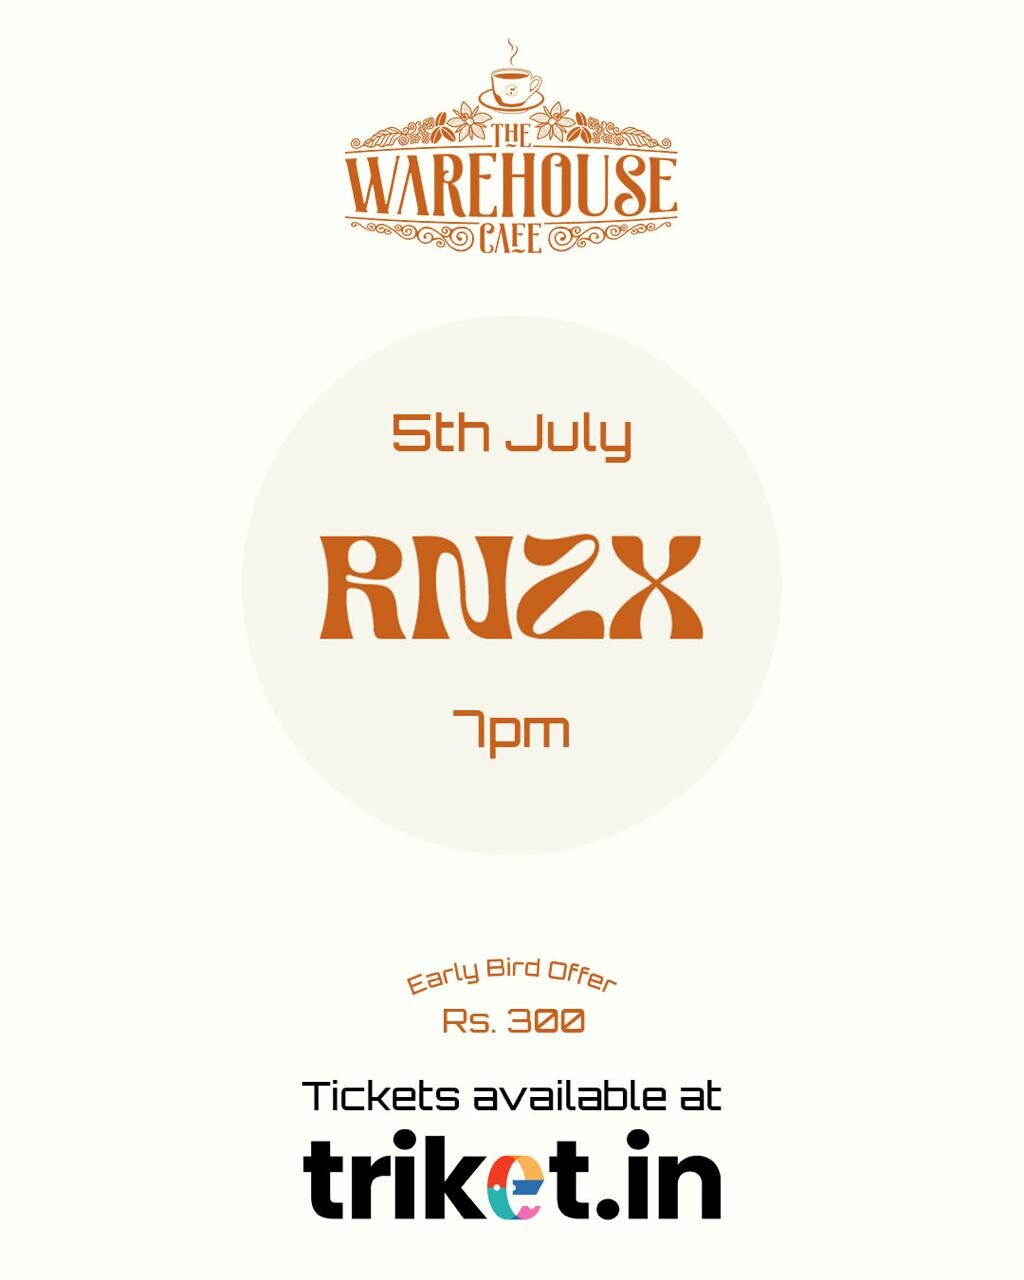 RNZX - Live at The Warehouse Café